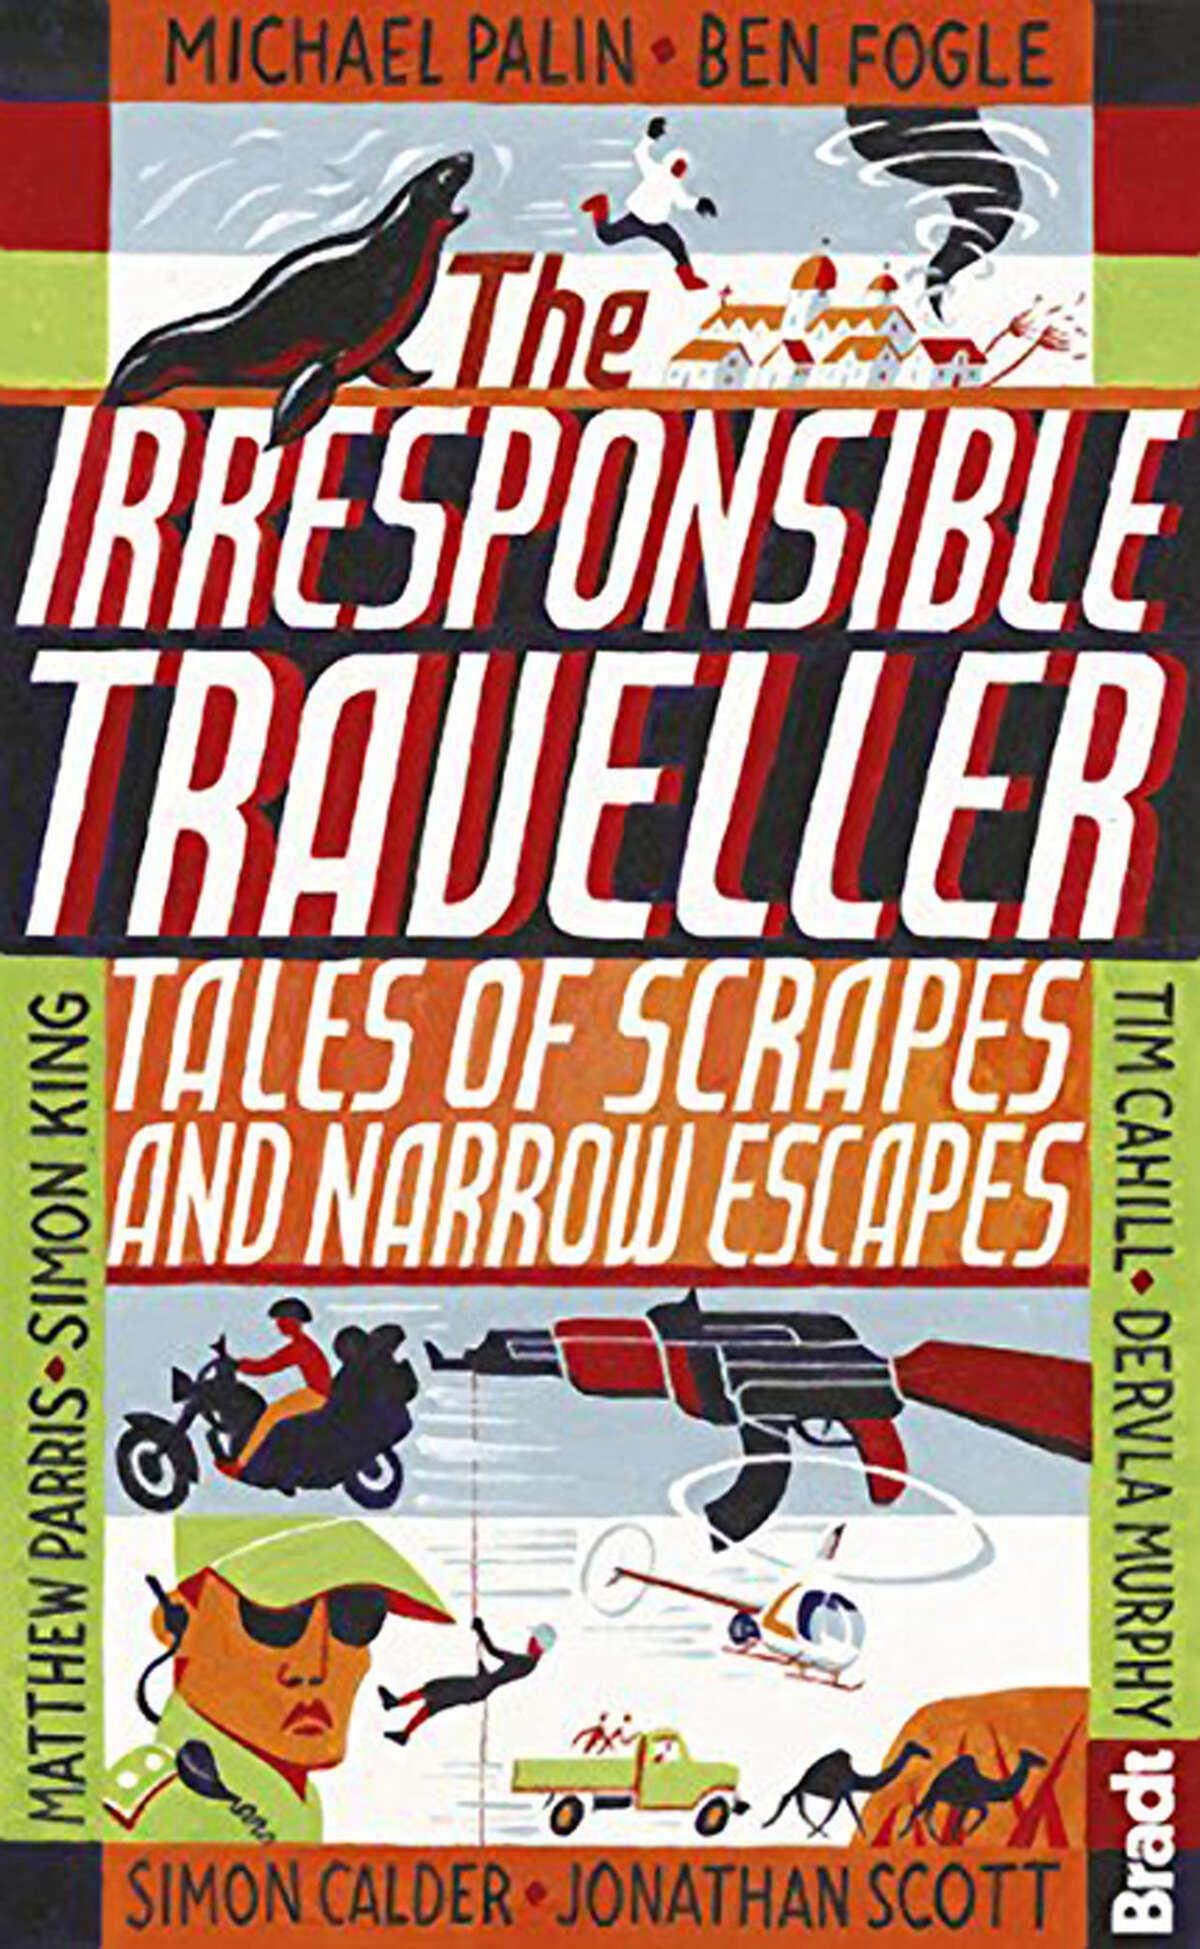 “The Irresponsible Traveller: Tales of Scrapes and Narrow Escapes” from Bradt.